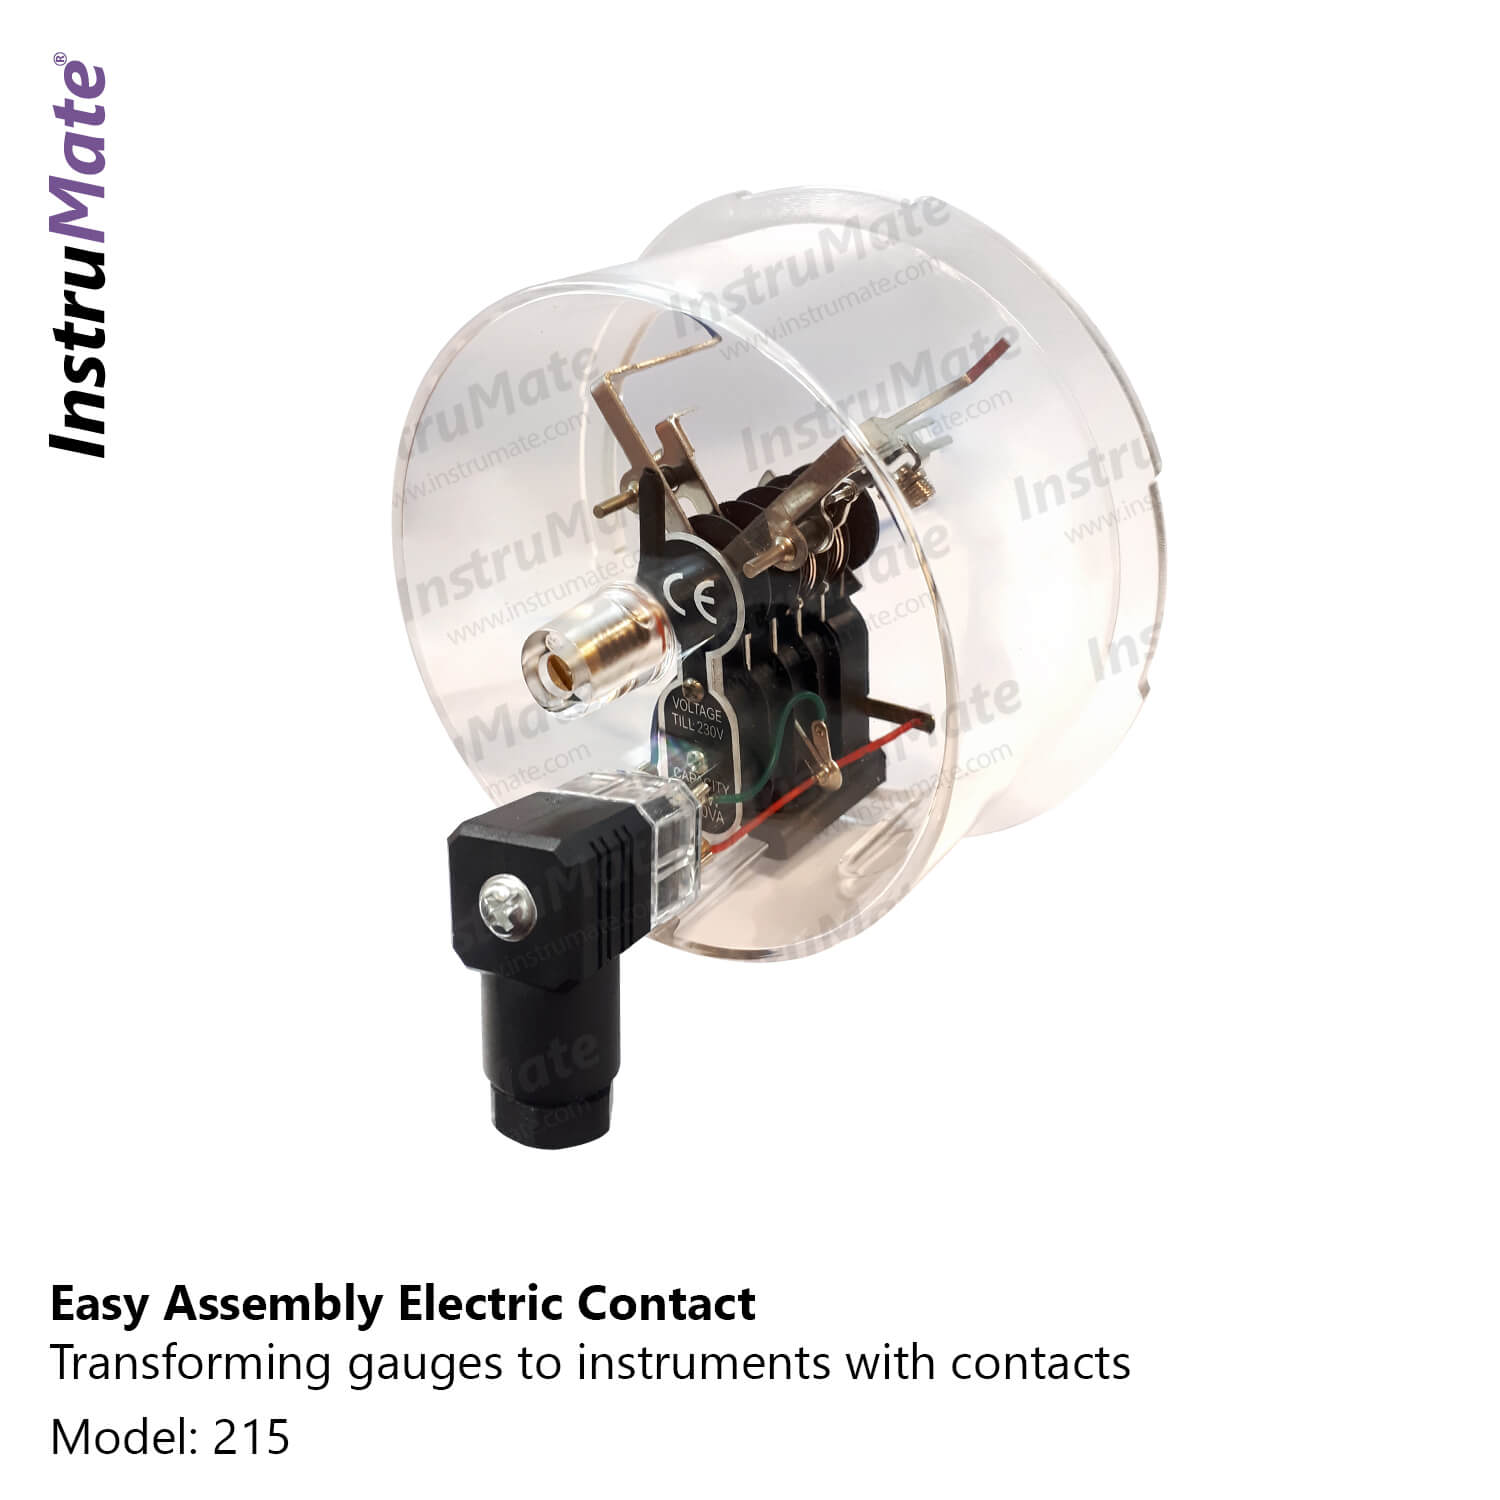 Easy Assembly Electric Contact - 215 - InstruMatea